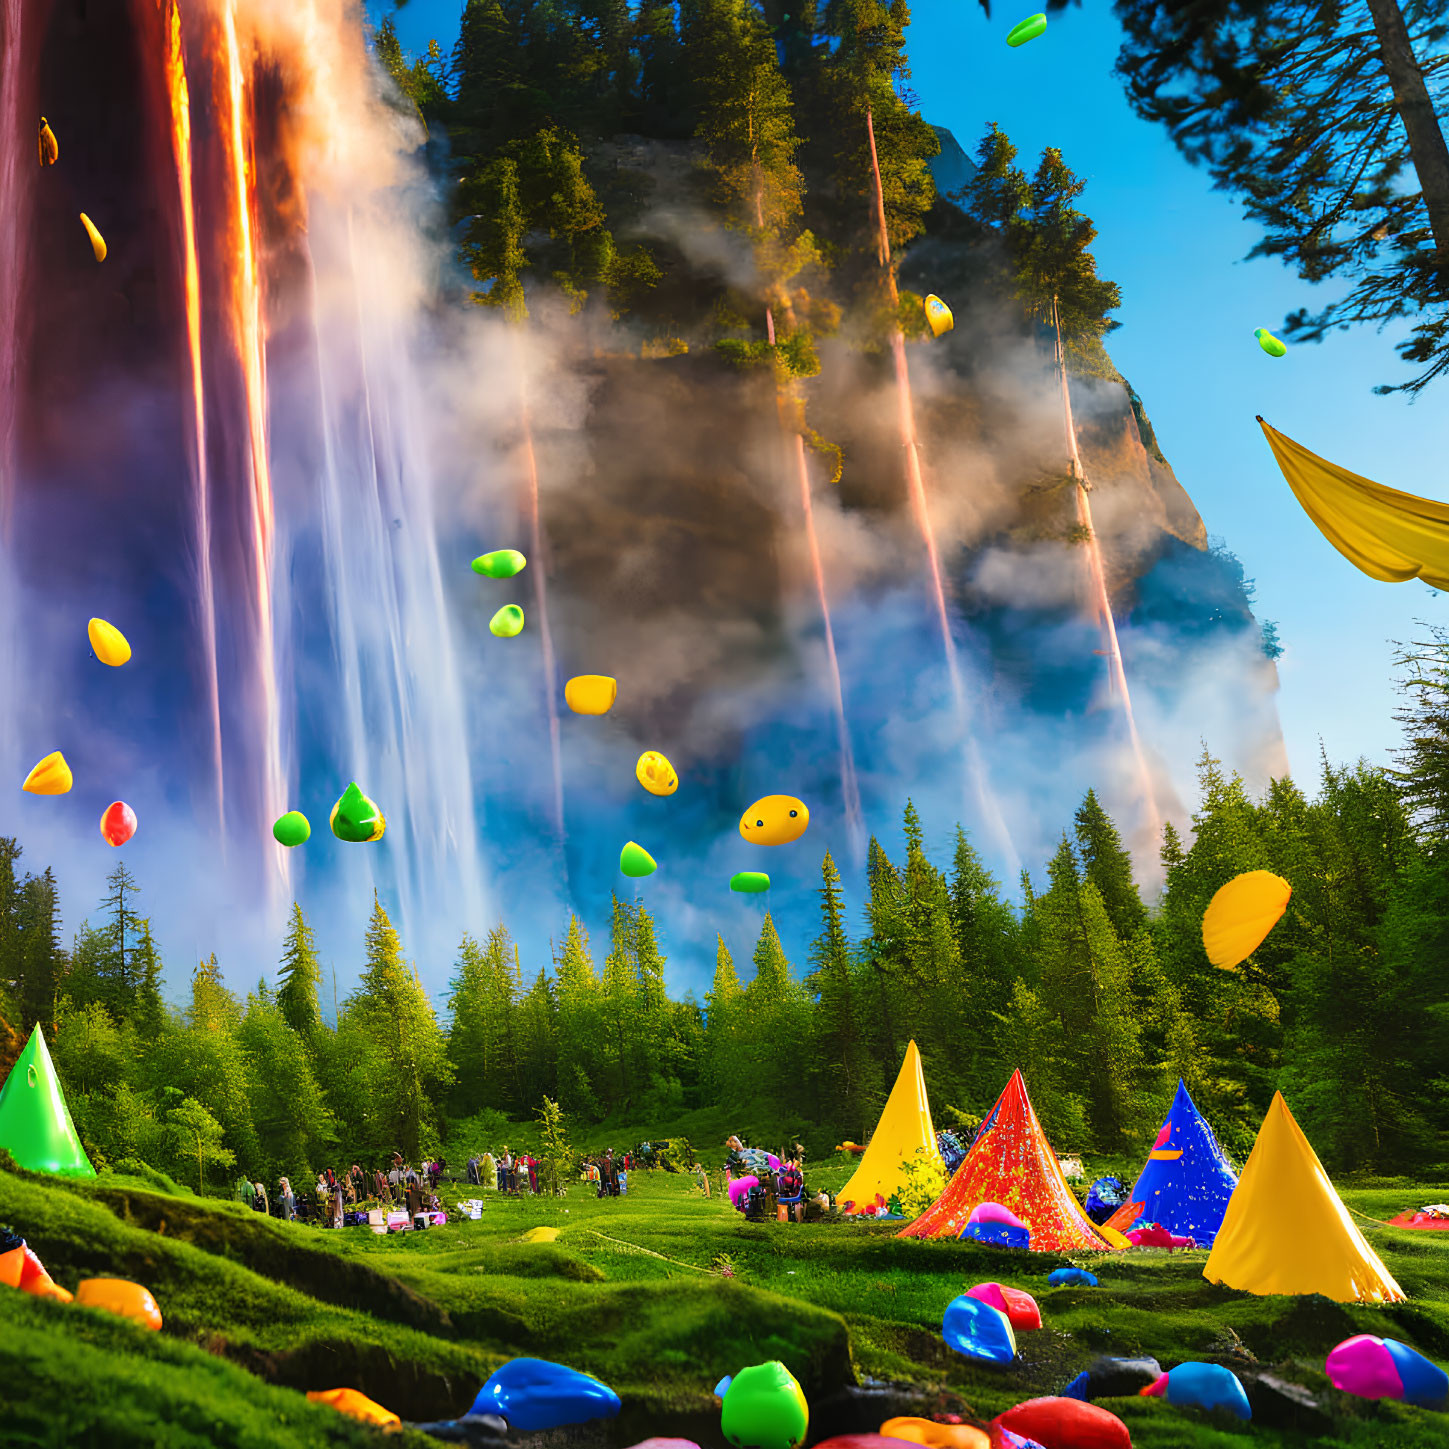 Colorful Bean-Shaped Objects Descending in Forest Gathering